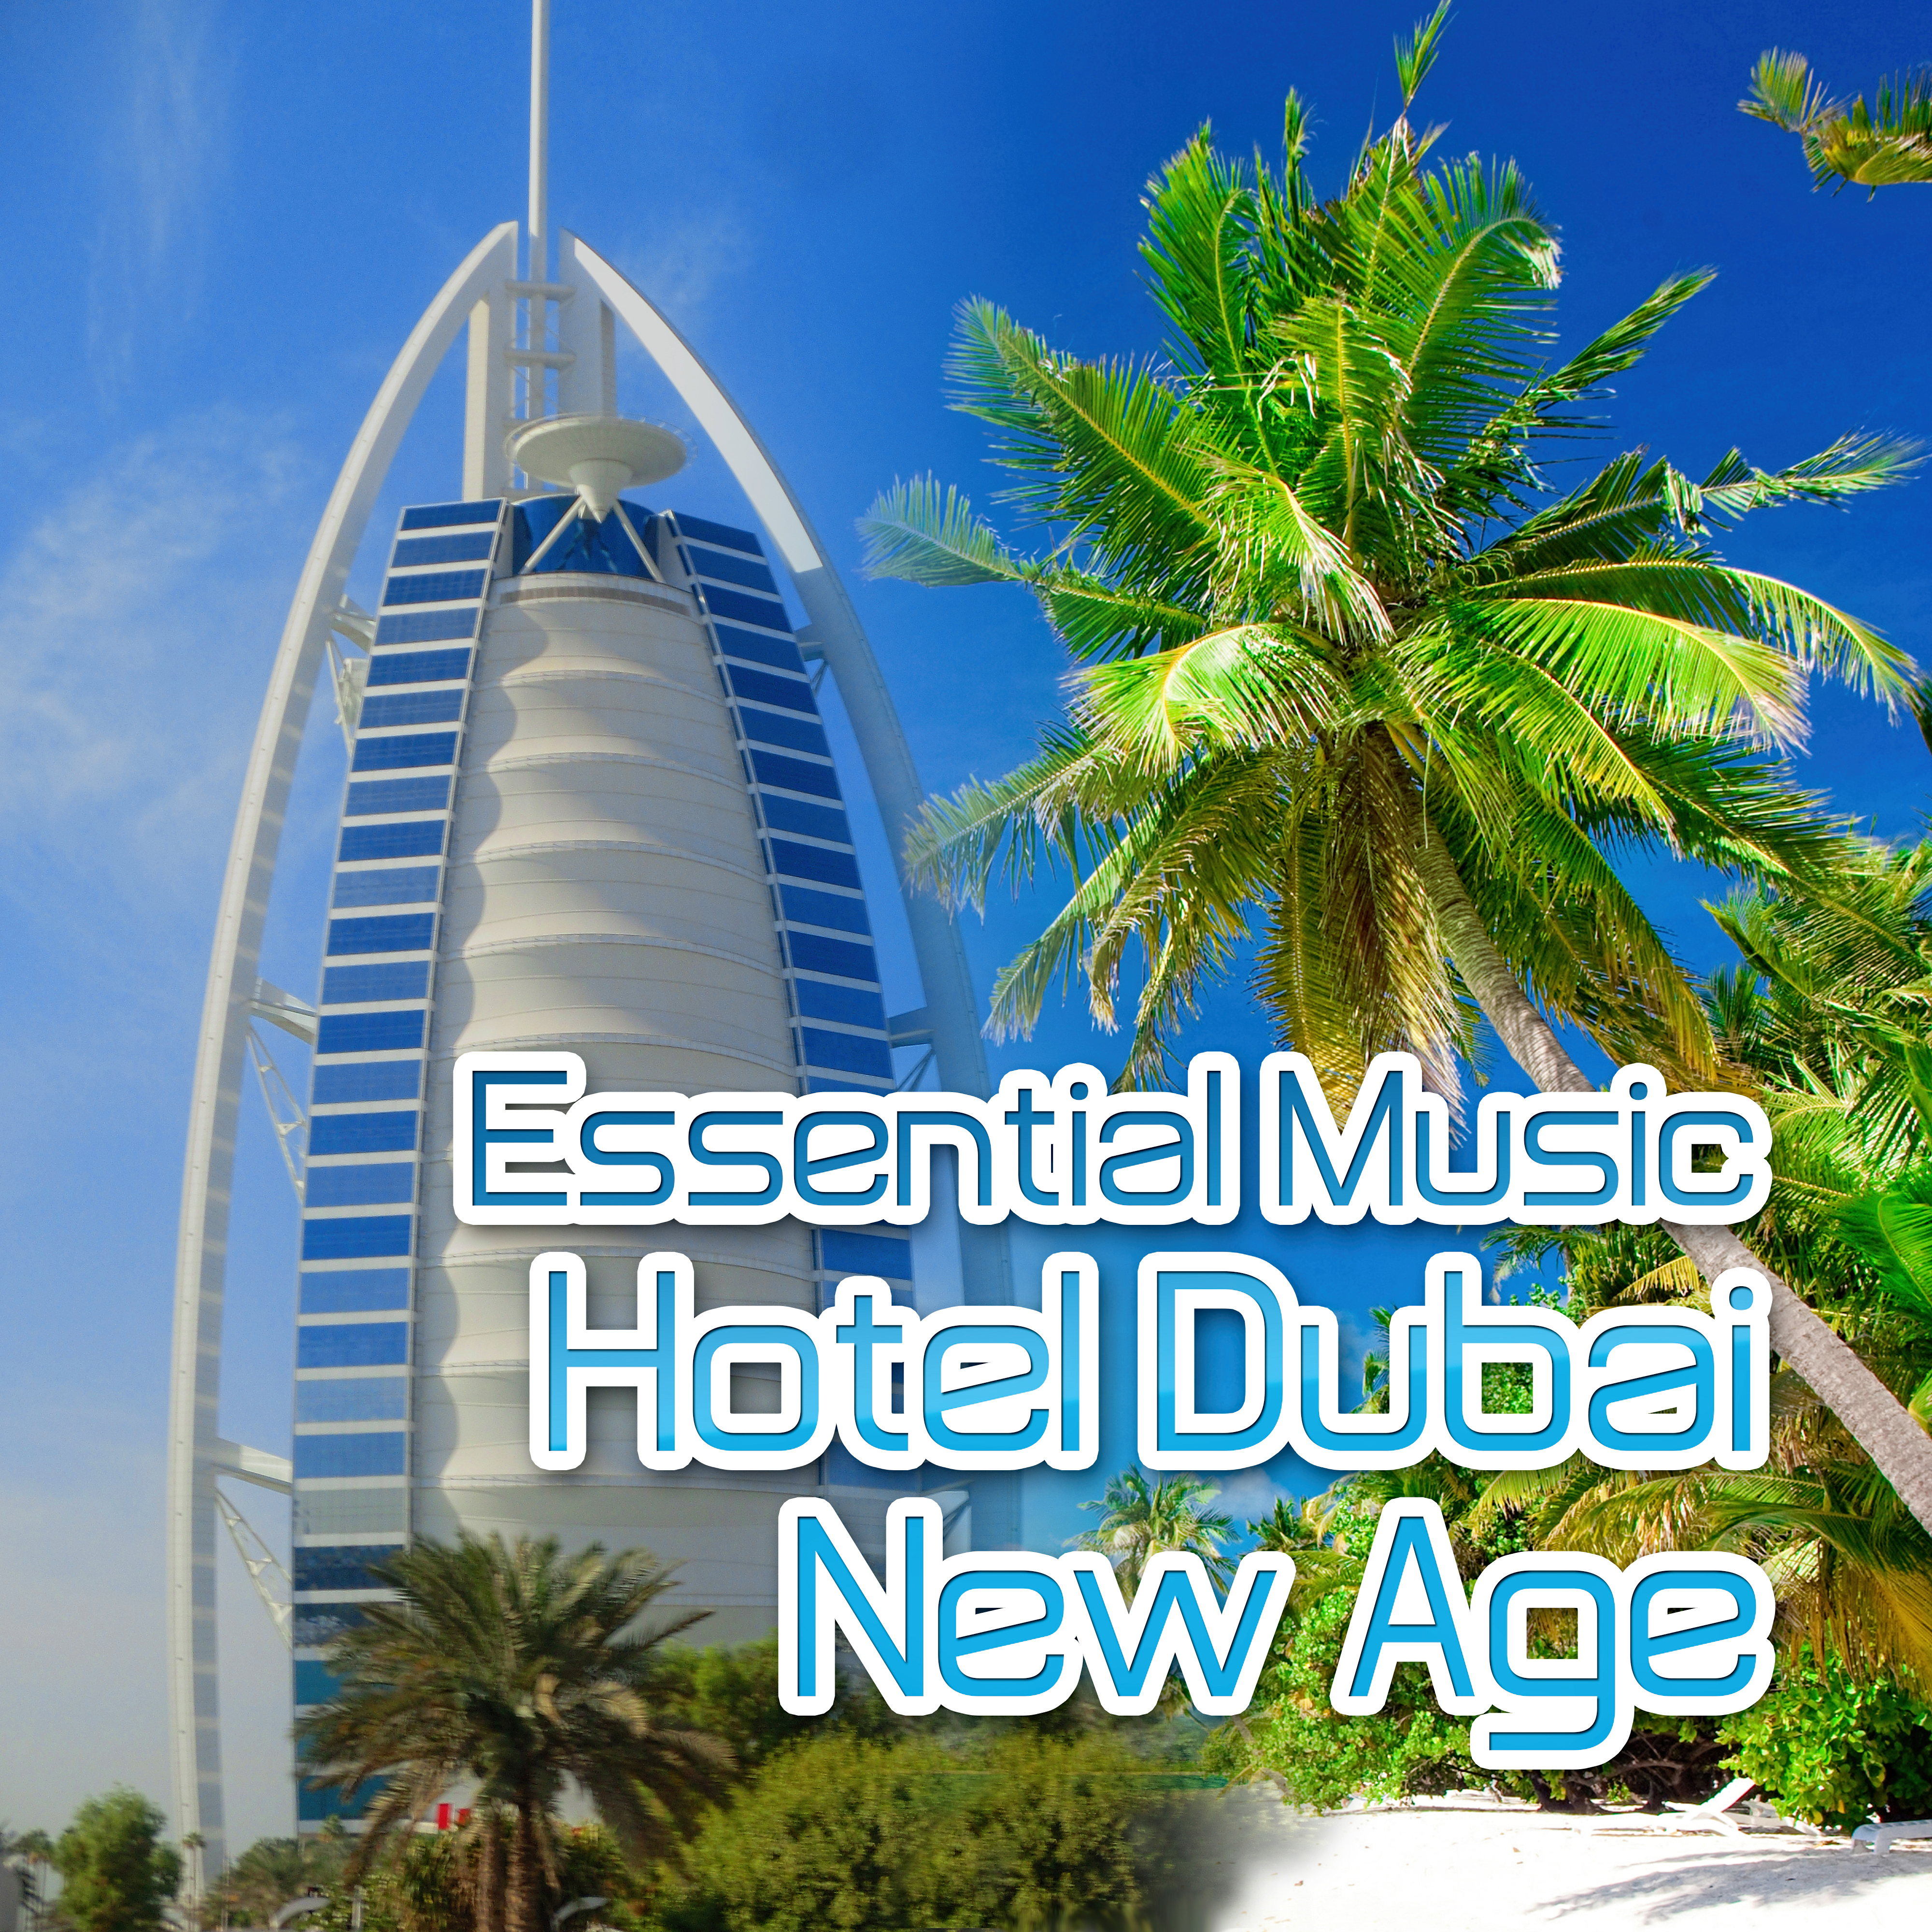 Essential Music Hotel Dubai  New Age  Spa Music, Wellness, Hydrotherapy, Massage Music, Nature Sounds, Easy Going, Total Relax